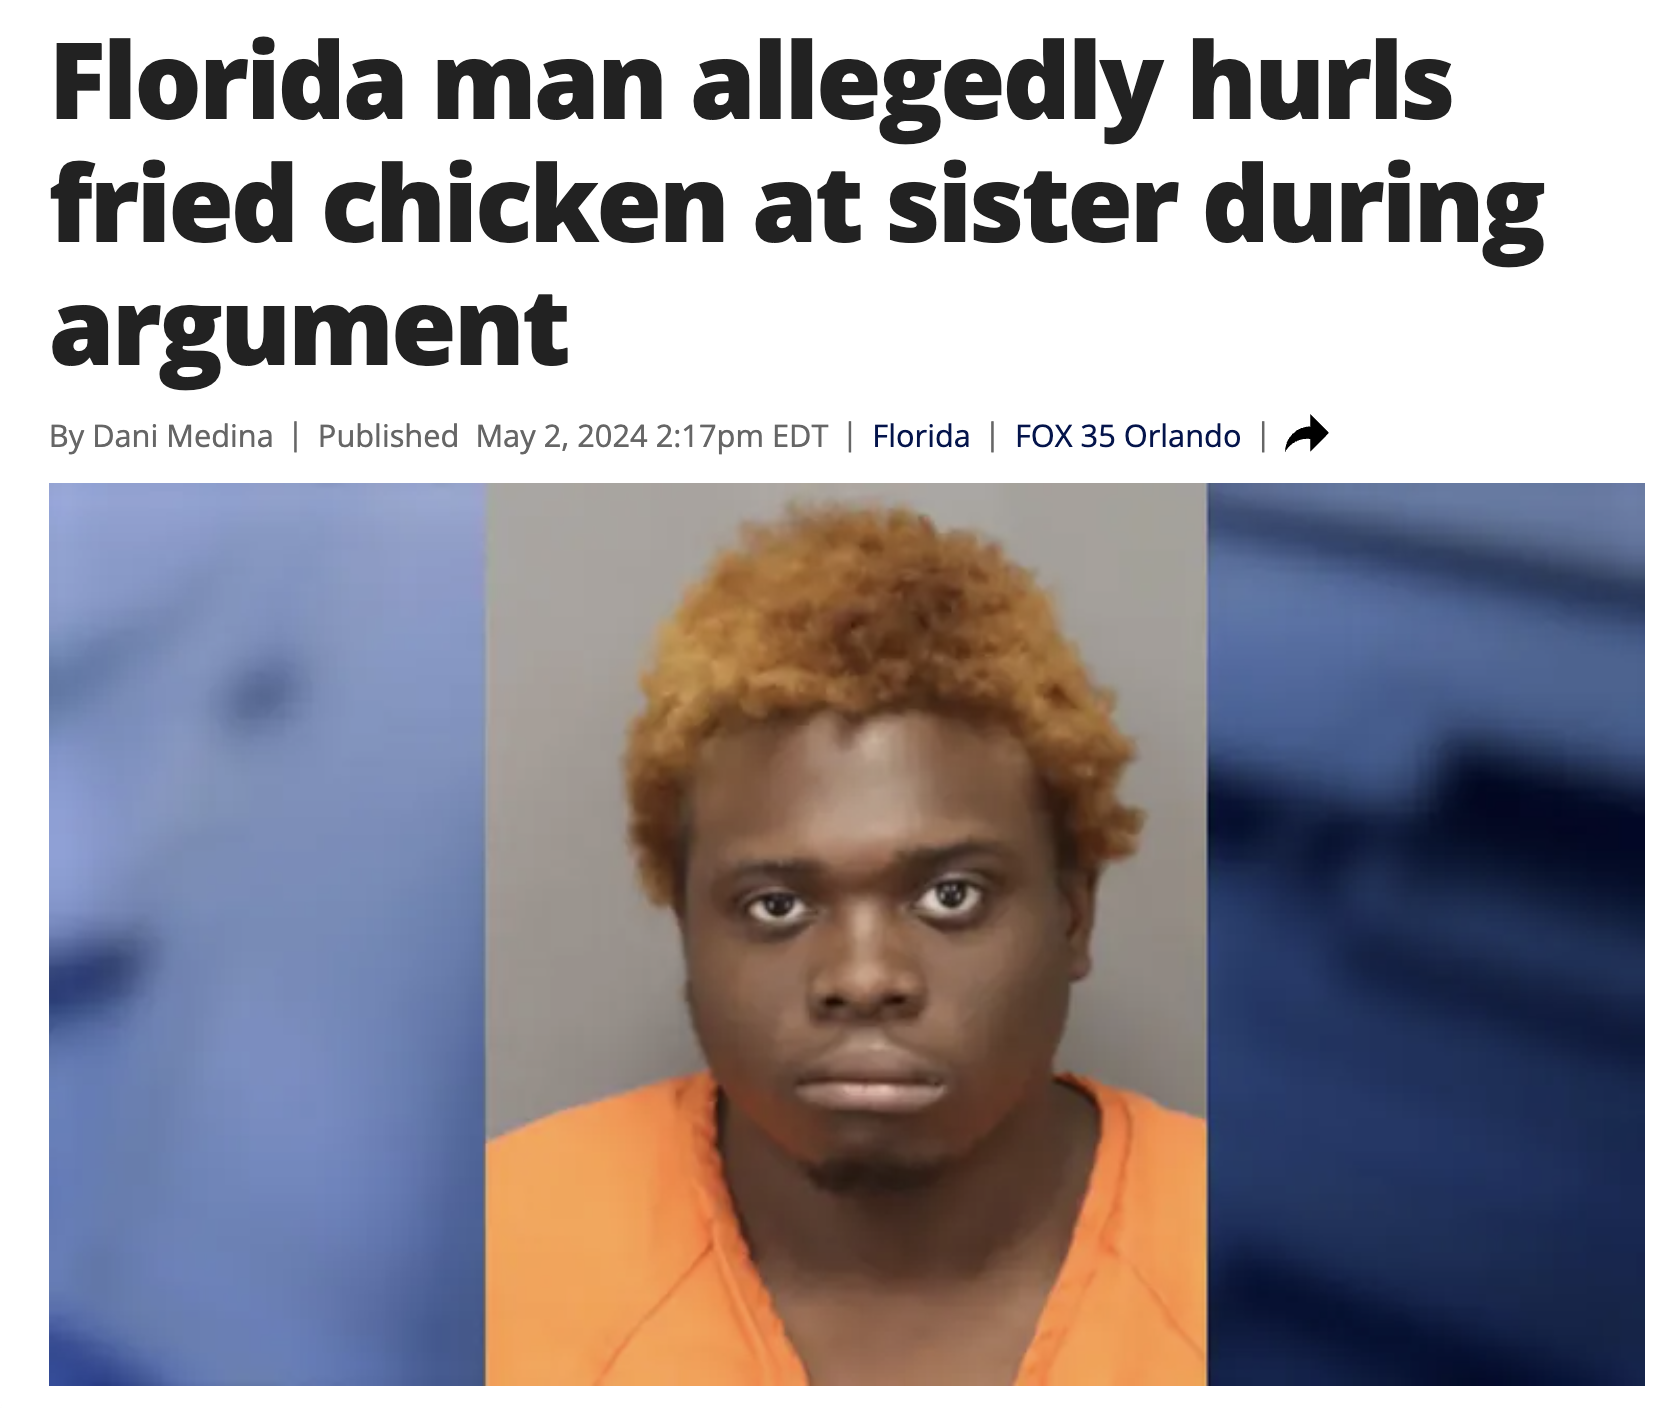 photo caption - Florida man allegedly hurls fried chicken at sister during argument By Dani Medina | Published pm Edt | Florida | Fox 35 Orlando |